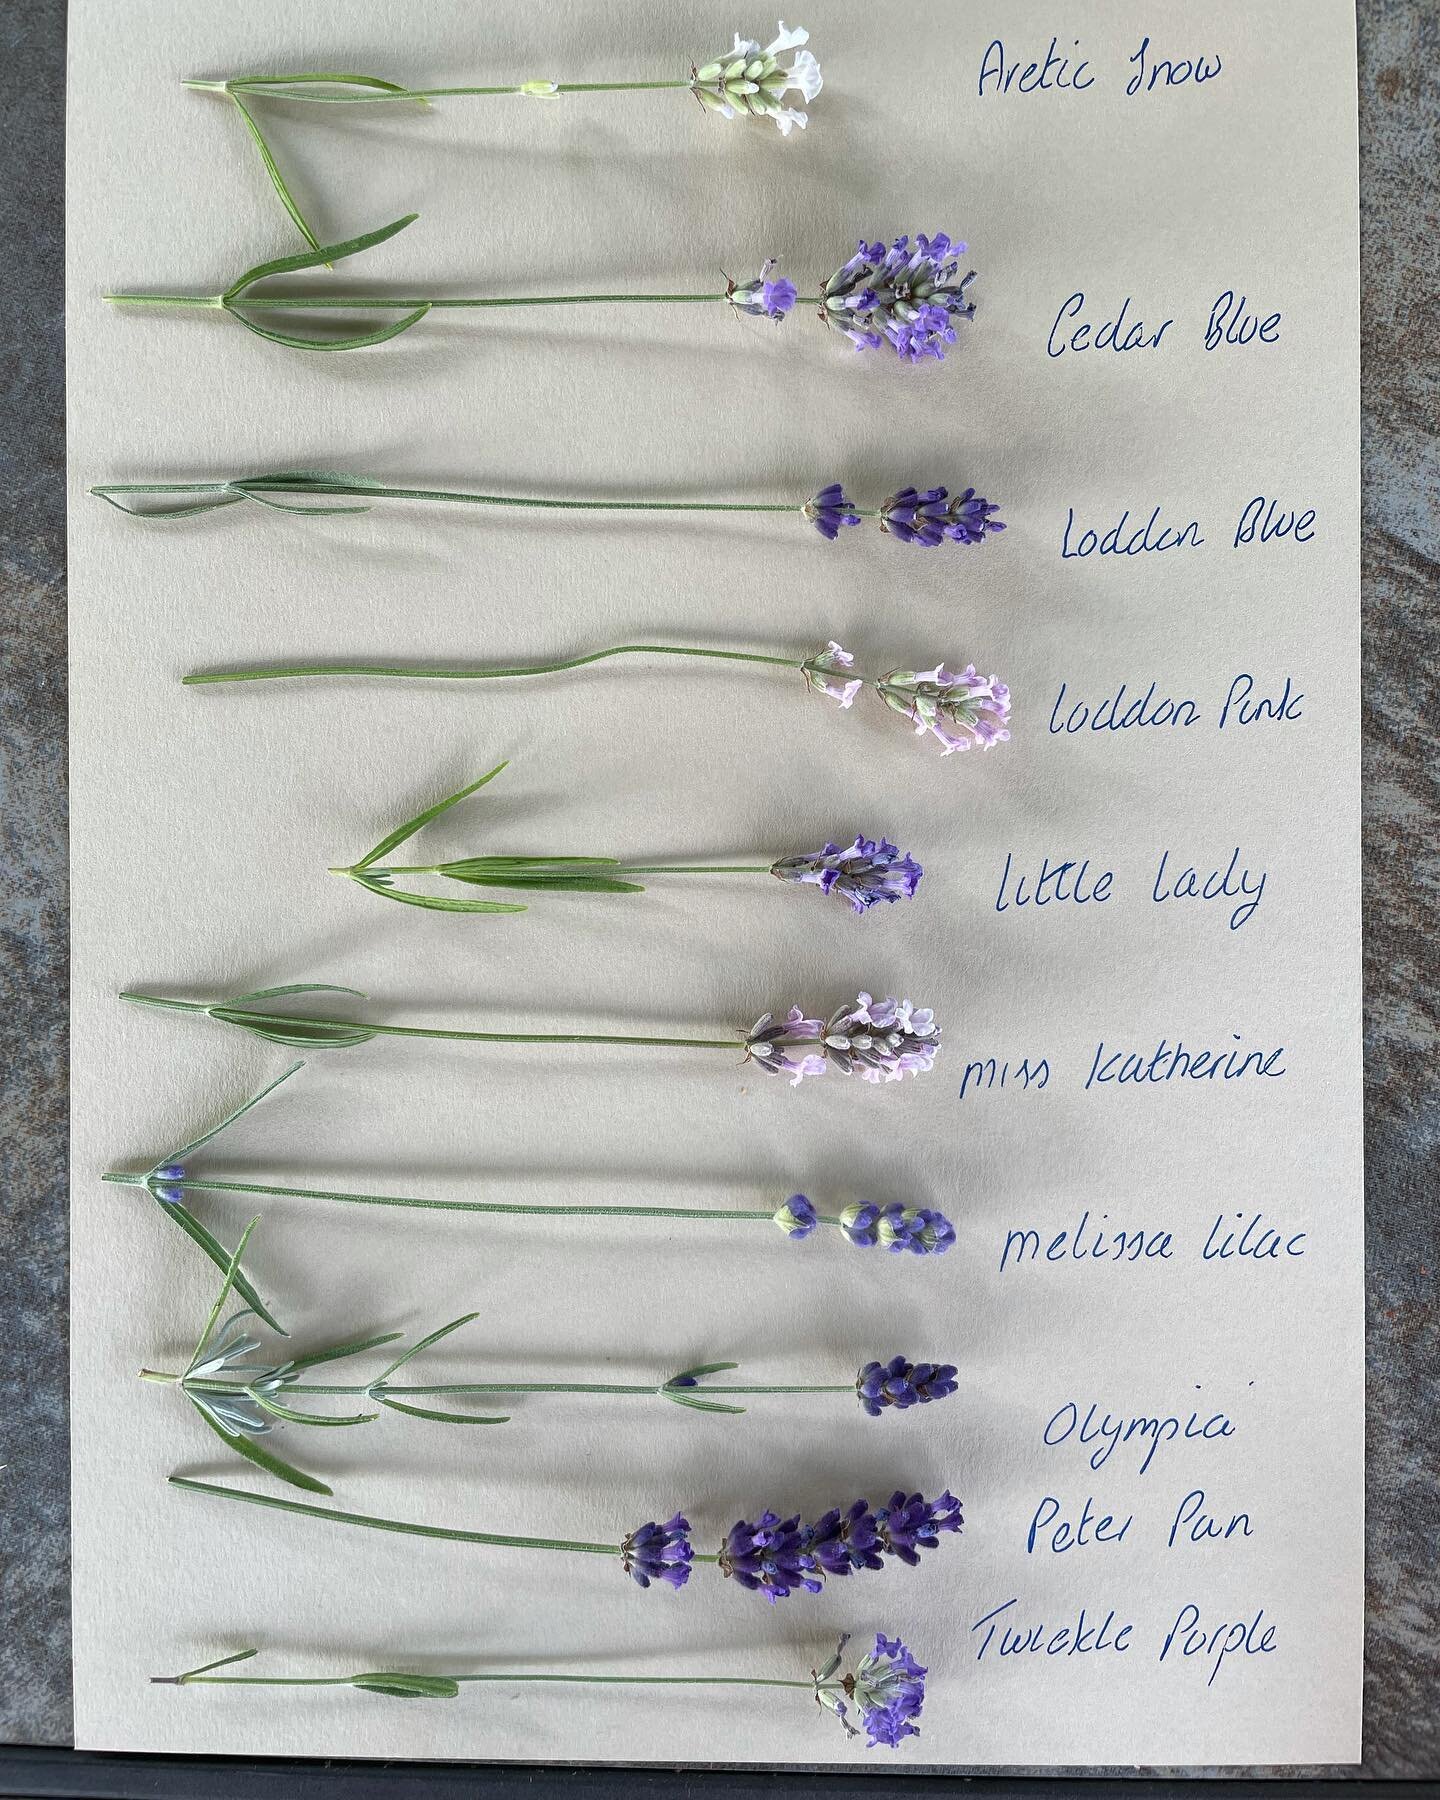 Here are 10 further varieties I have planted out in the paddock at the farm so visitors can see the different sizes and colours. 
(Notice I had to sneak Peter Pan in as I&rsquo;d forgotten him!)
💜🌱🤍🌱🌸
#arcticsnowlavender #cedarbluelavender #lodd